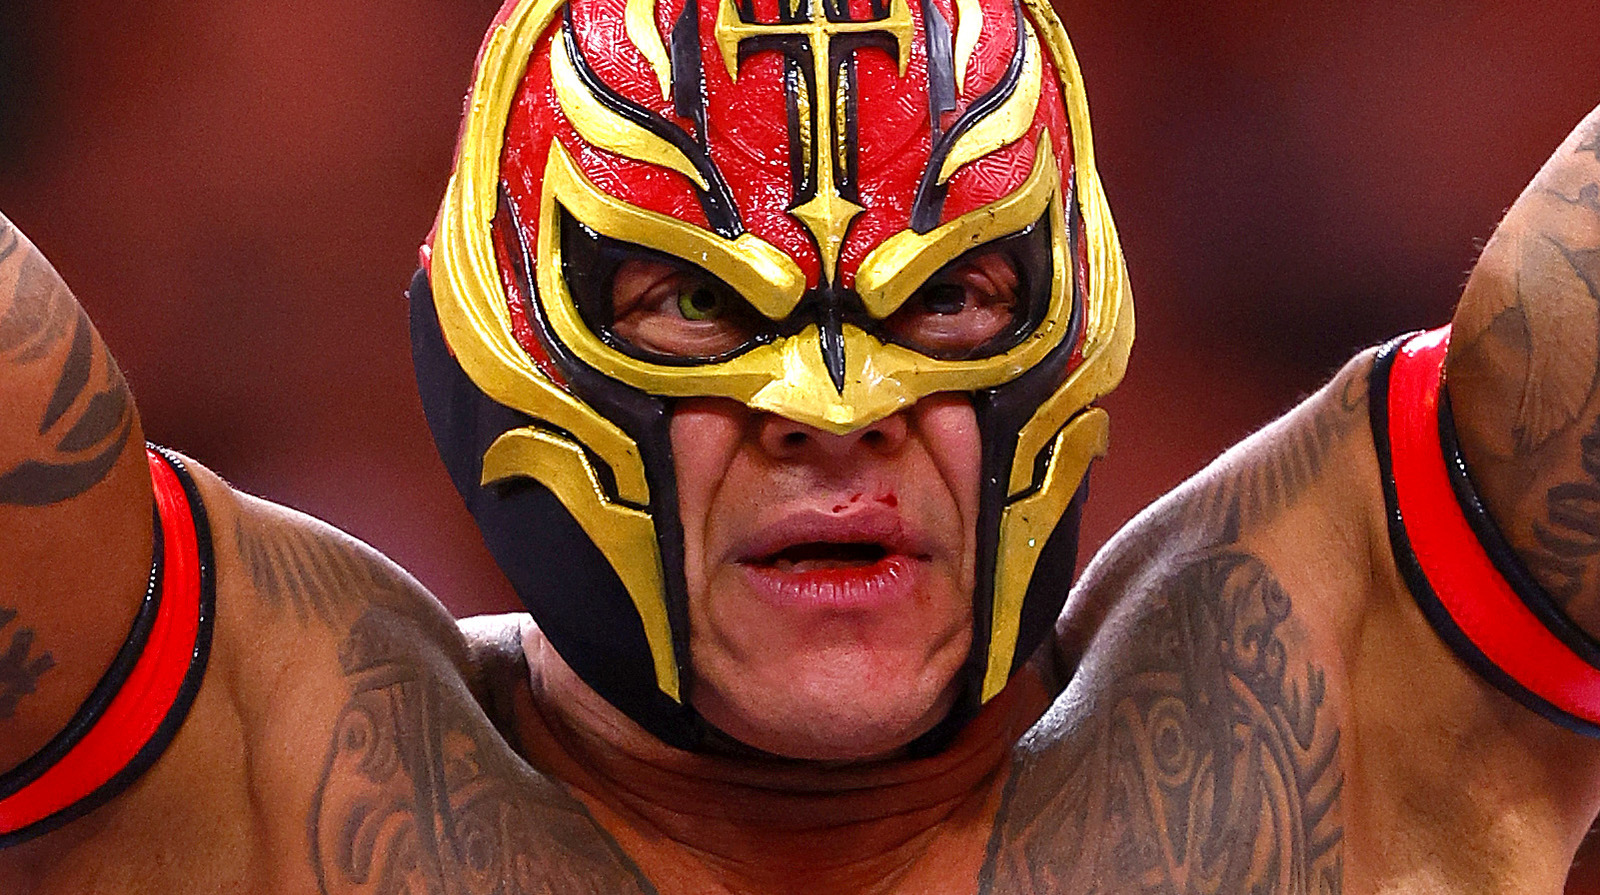 Rey Mysterio Discusses His Addiction To Painkillers And The Help He